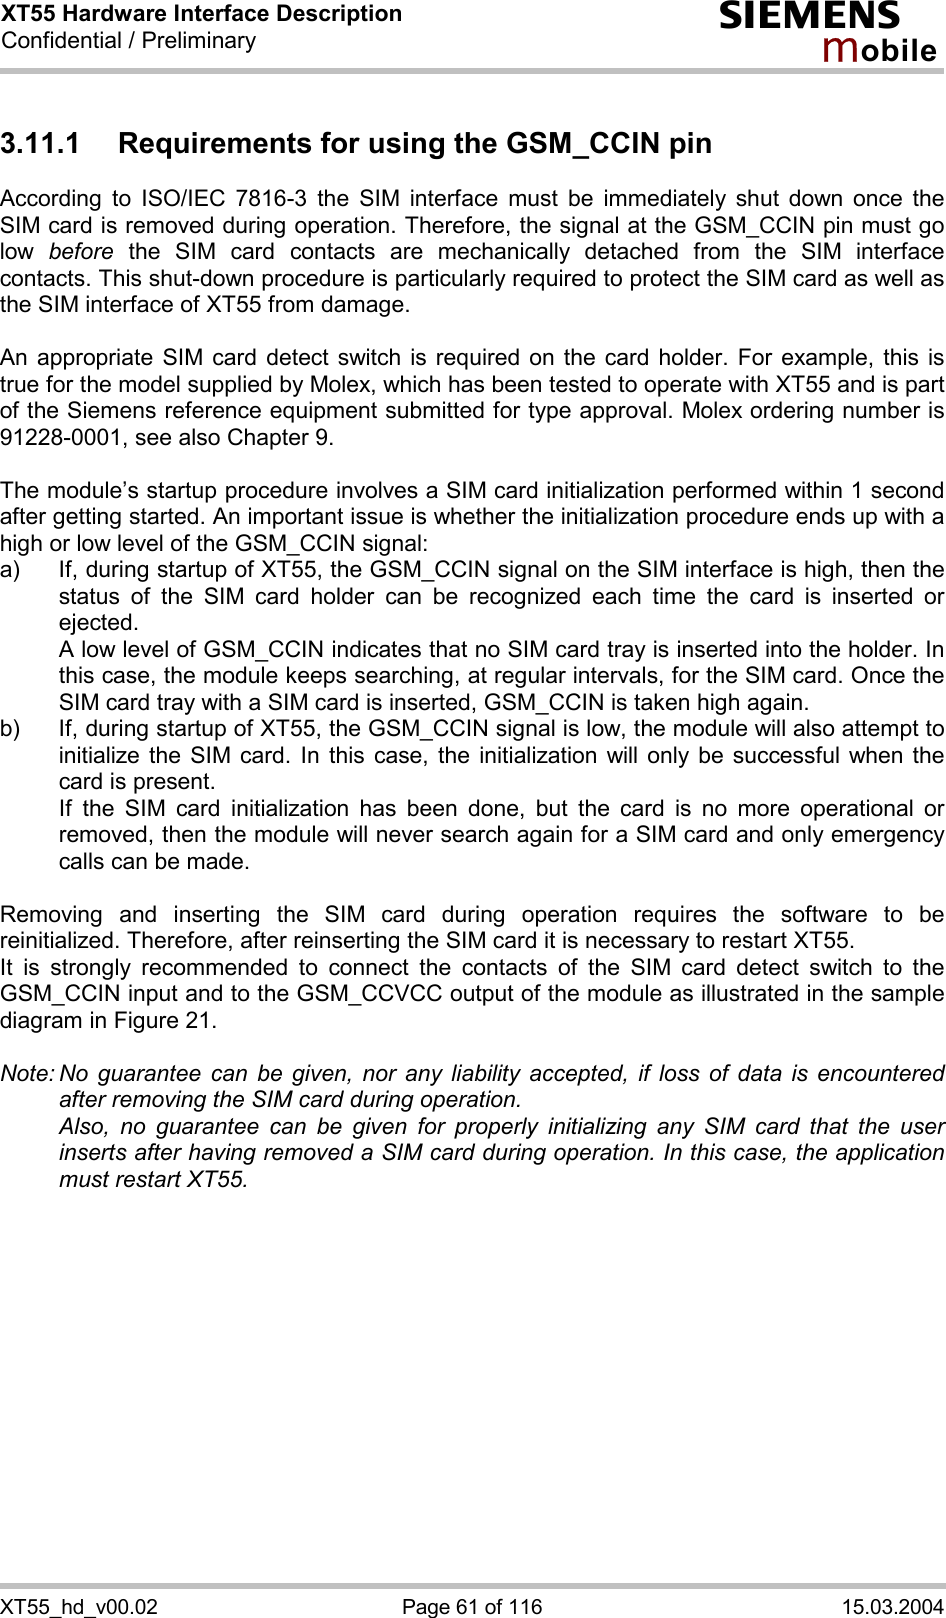 XT55 Hardware Interface Description Confidential / Preliminary s mo b i l e XT55_hd_v00.02  Page 61 of 116  15.03.2004 3.11.1  Requirements for using the GSM_CCIN pin According to ISO/IEC 7816-3 the SIM interface must be immediately shut down once the SIM card is removed during operation. Therefore, the signal at the GSM_CCIN pin must go low  before the SIM card contacts are mechanically detached from the SIM interface contacts. This shut-down procedure is particularly required to protect the SIM card as well as the SIM interface of XT55 from damage.  An appropriate SIM card detect switch is required on the card holder. For example, this is true for the model supplied by Molex, which has been tested to operate with XT55 and is part of the Siemens reference equipment submitted for type approval. Molex ordering number is 91228-0001, see also Chapter 9.  The module’s startup procedure involves a SIM card initialization performed within 1 second after getting started. An important issue is whether the initialization procedure ends up with a high or low level of the GSM_CCIN signal: a)  If, during startup of XT55, the GSM_CCIN signal on the SIM interface is high, then the status of the SIM card holder can be recognized each time the card is inserted or ejected.    A low level of GSM_CCIN indicates that no SIM card tray is inserted into the holder. In this case, the module keeps searching, at regular intervals, for the SIM card. Once the SIM card tray with a SIM card is inserted, GSM_CCIN is taken high again. b)  If, during startup of XT55, the GSM_CCIN signal is low, the module will also attempt to initialize the SIM card. In this case, the initialization will only be successful when the card is present.    If the SIM card initialization has been done, but the card is no more operational or removed, then the module will never search again for a SIM card and only emergency calls can be made.  Removing and inserting the SIM card during operation requires the software to be reinitialized. Therefore, after reinserting the SIM card it is necessary to restart XT55.  It is strongly recommended to connect the contacts of the SIM card detect switch to the GSM_CCIN input and to the GSM_CCVCC output of the module as illustrated in the sample diagram in Figure 21.  Note: No guarantee can be given, nor any liability accepted, if loss of data is encountered after removing the SIM card during operation.    Also, no guarantee can be given for properly initializing any SIM card that the user inserts after having removed a SIM card during operation. In this case, the application must restart XT55.   